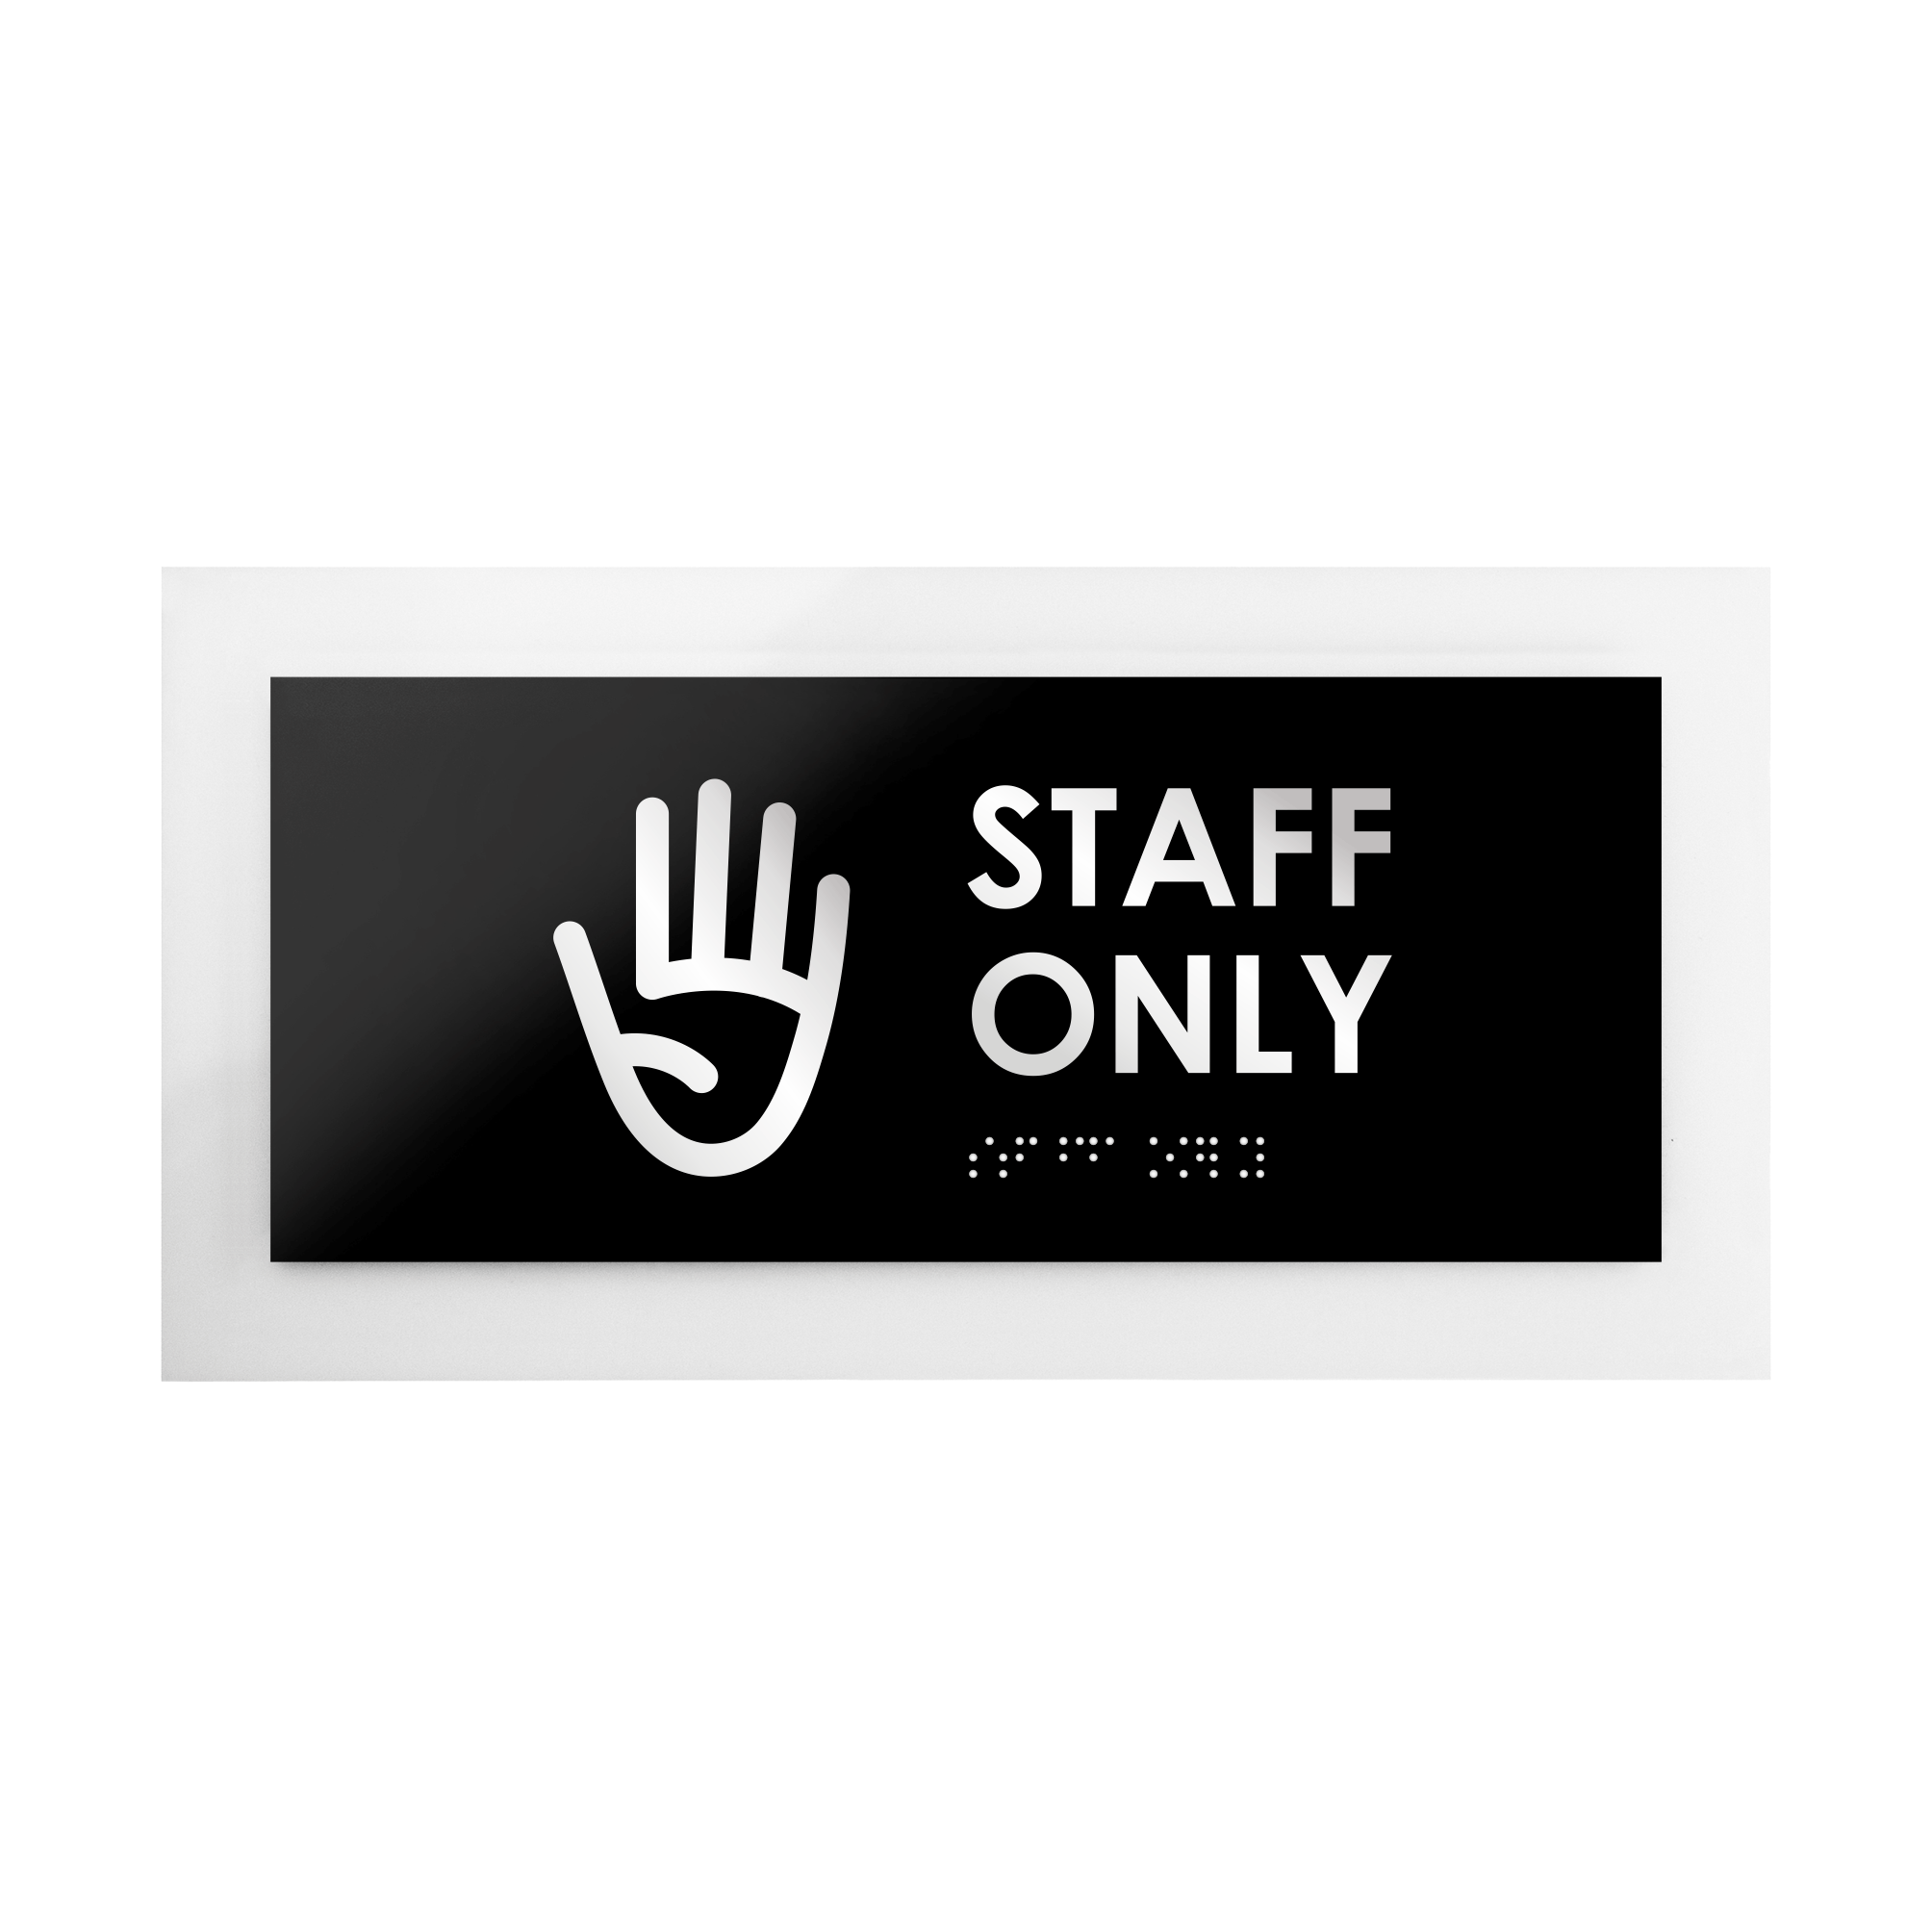 STAFF ONLY Work Place Acrylic Engraved Black Door Sign 